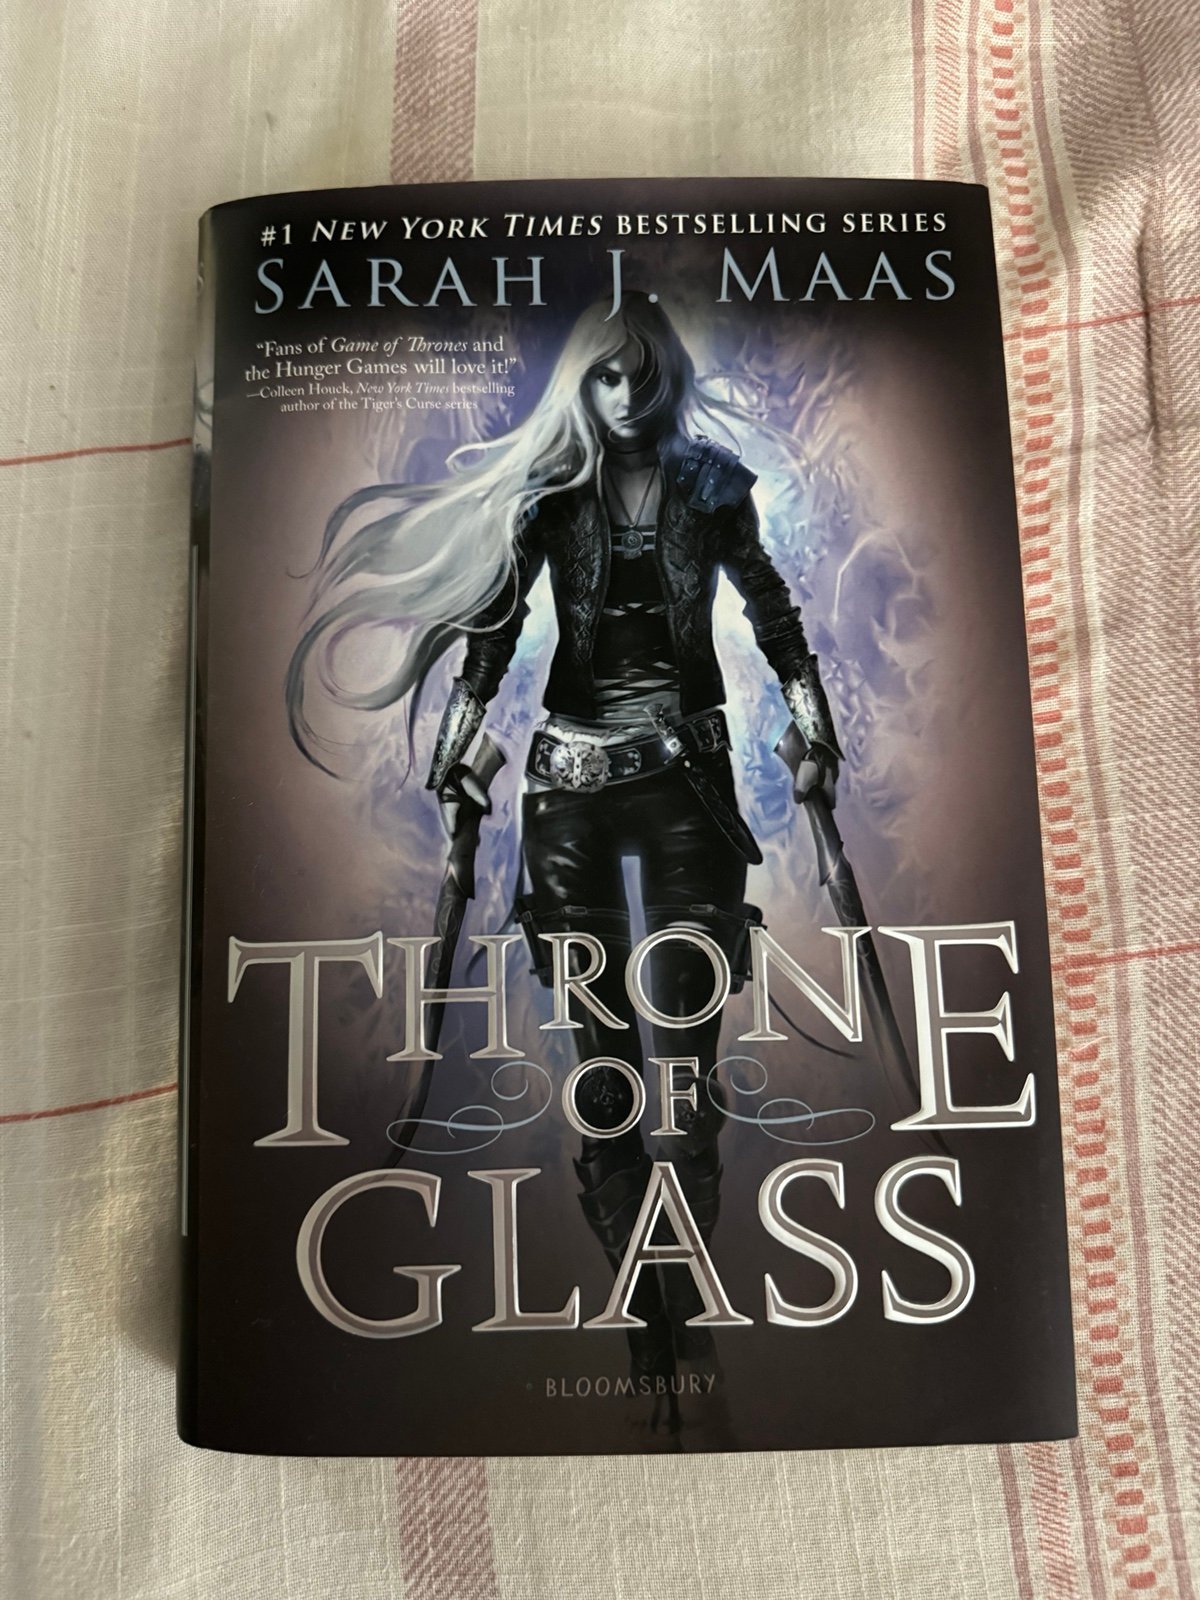 Throne of glass out of print hardcover 5Z3zFAJtz